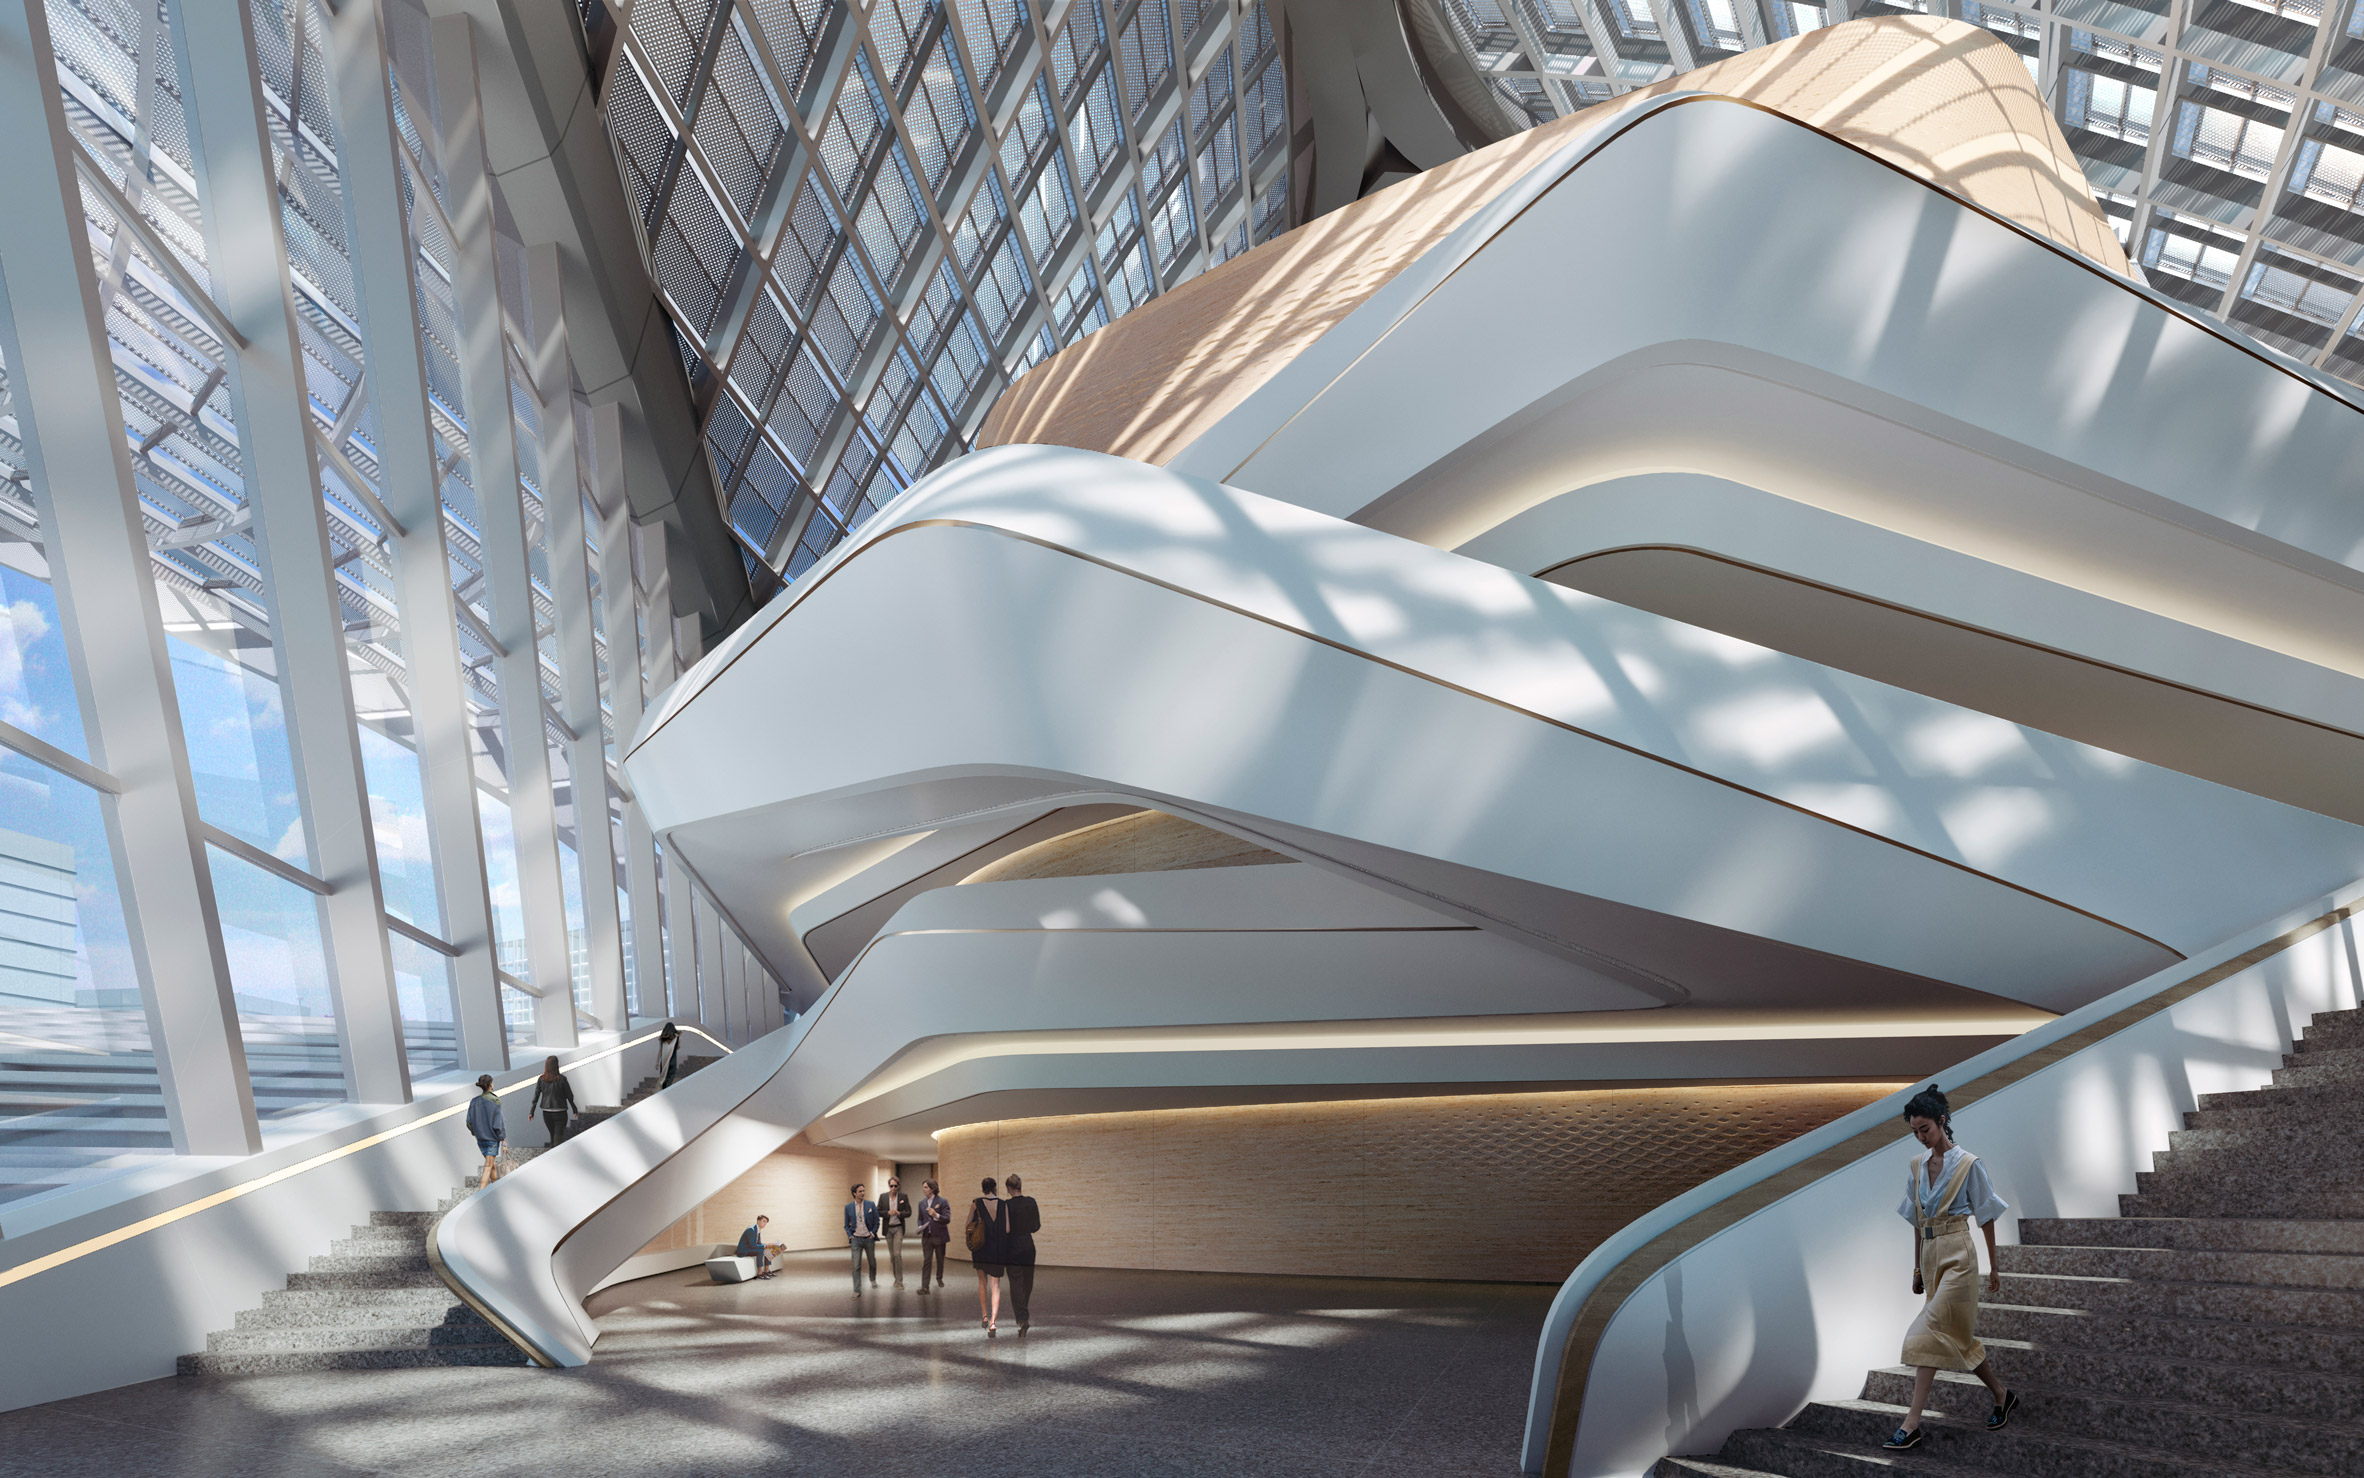 A folding staircase inside a Chinese cultural centre by Zaha Hadid Architects